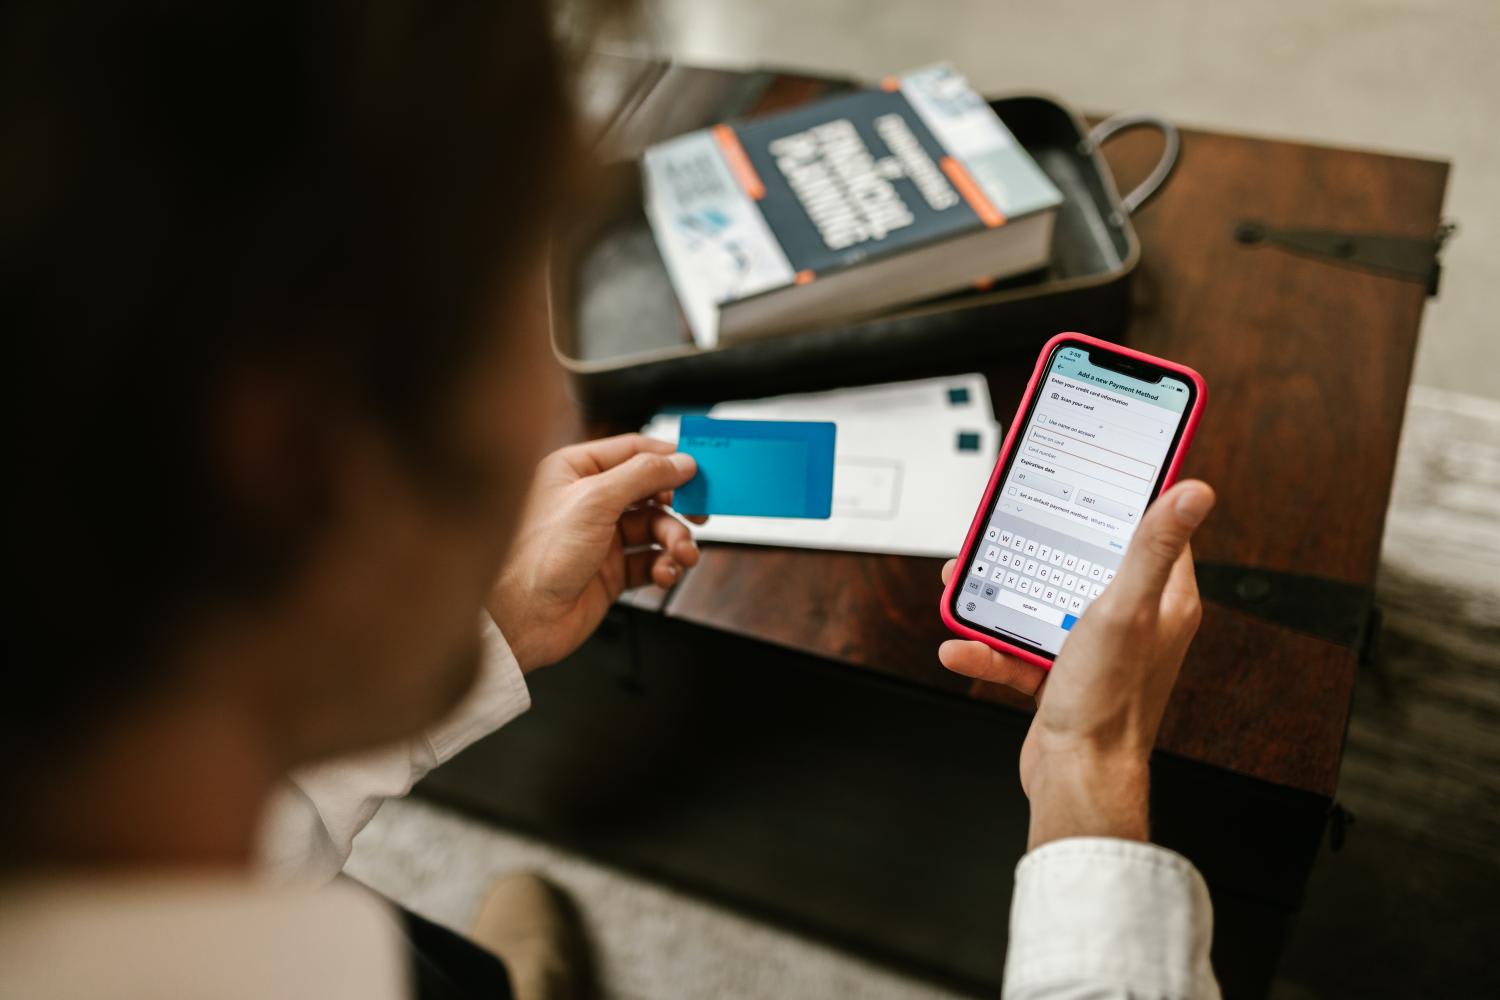 New research the author conducted with her colleagues shows smartphone addiction among gen Z consumers being strongly related to compulsive buying behaviour.